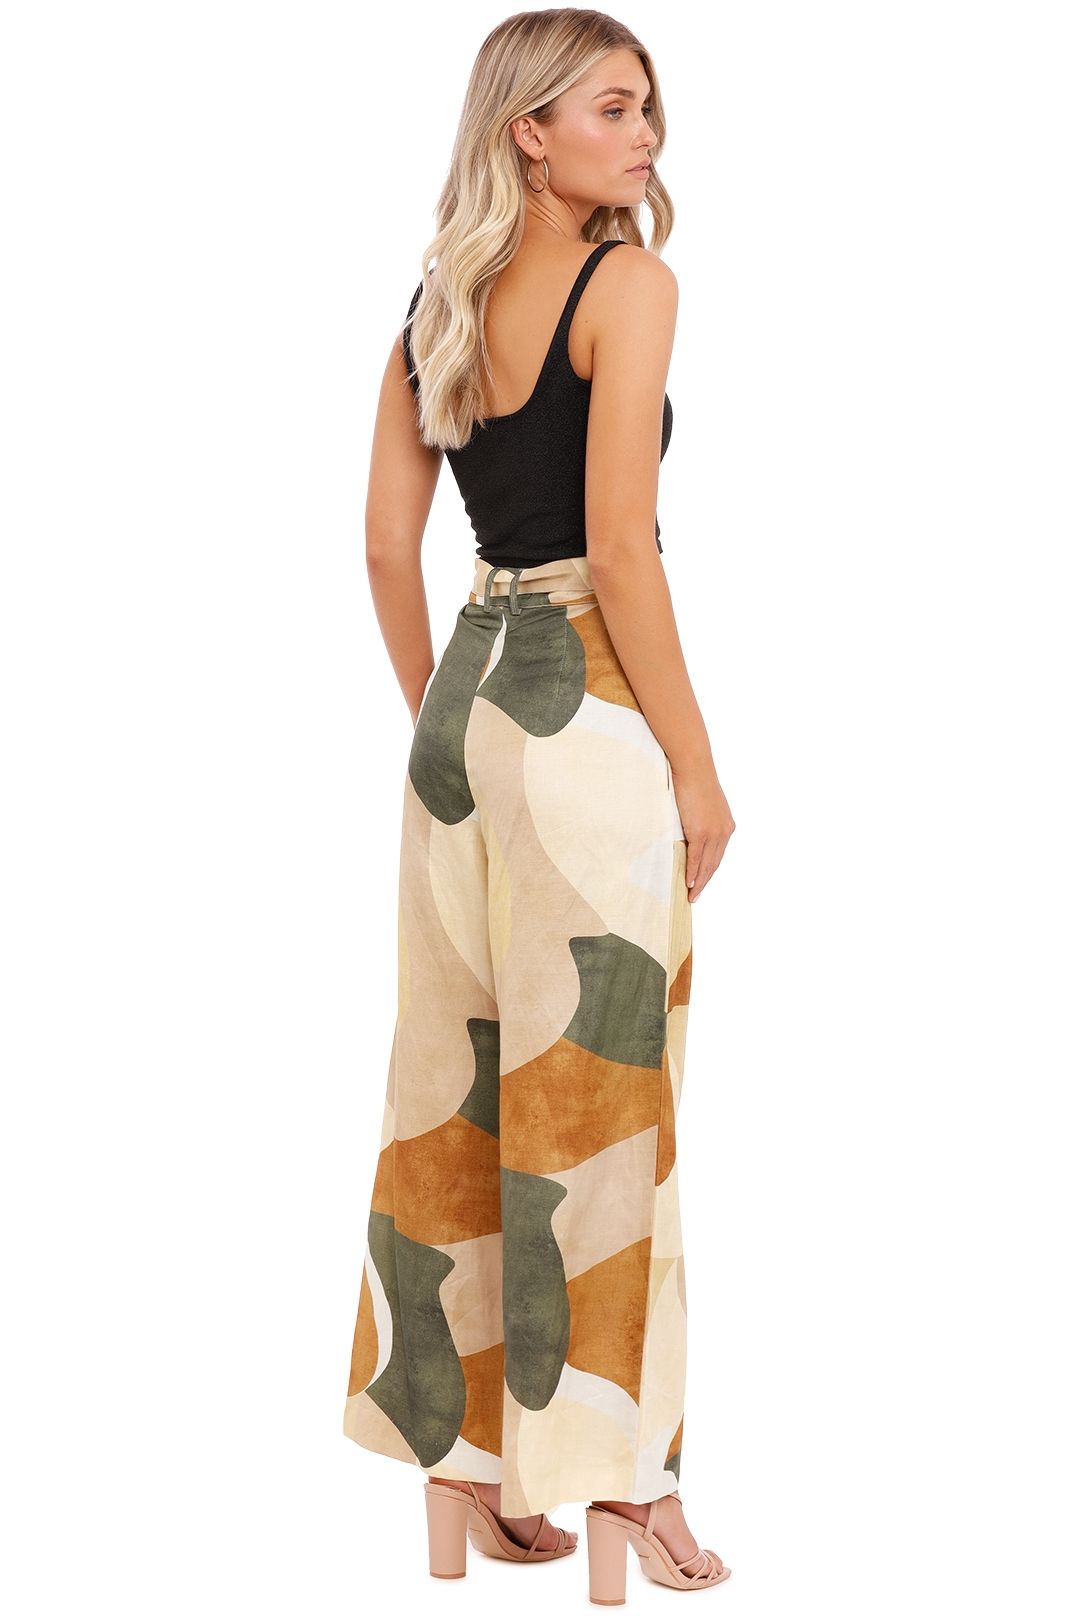 Ministry of Style Retro Resort Wide Leg Pants Maxi